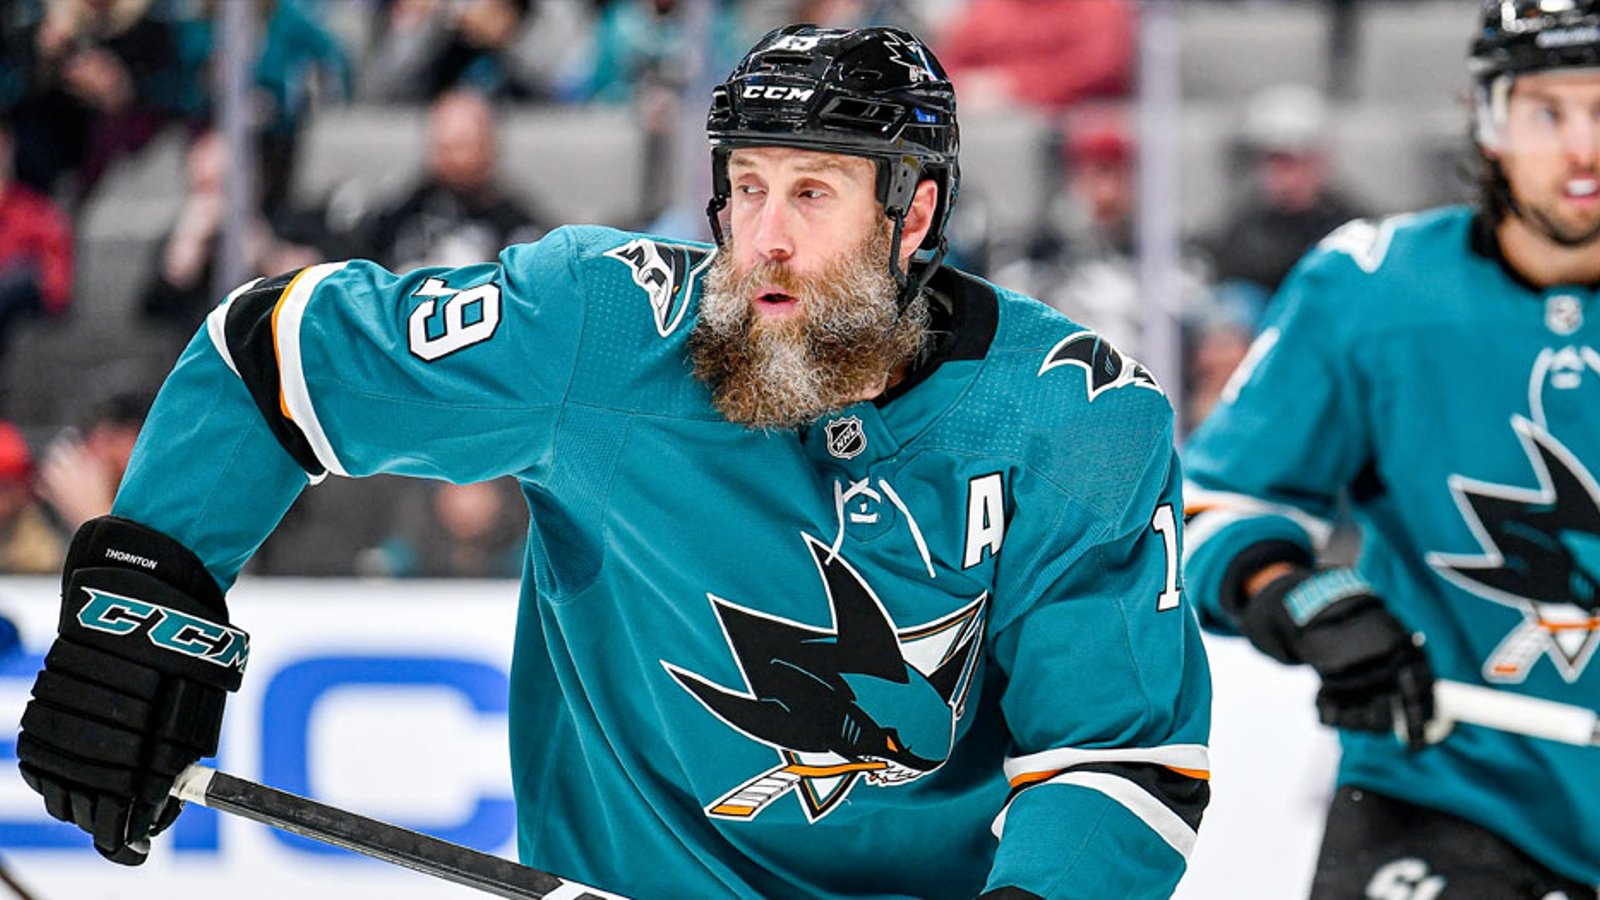 Report: Joe Thornton is officially on the trade block